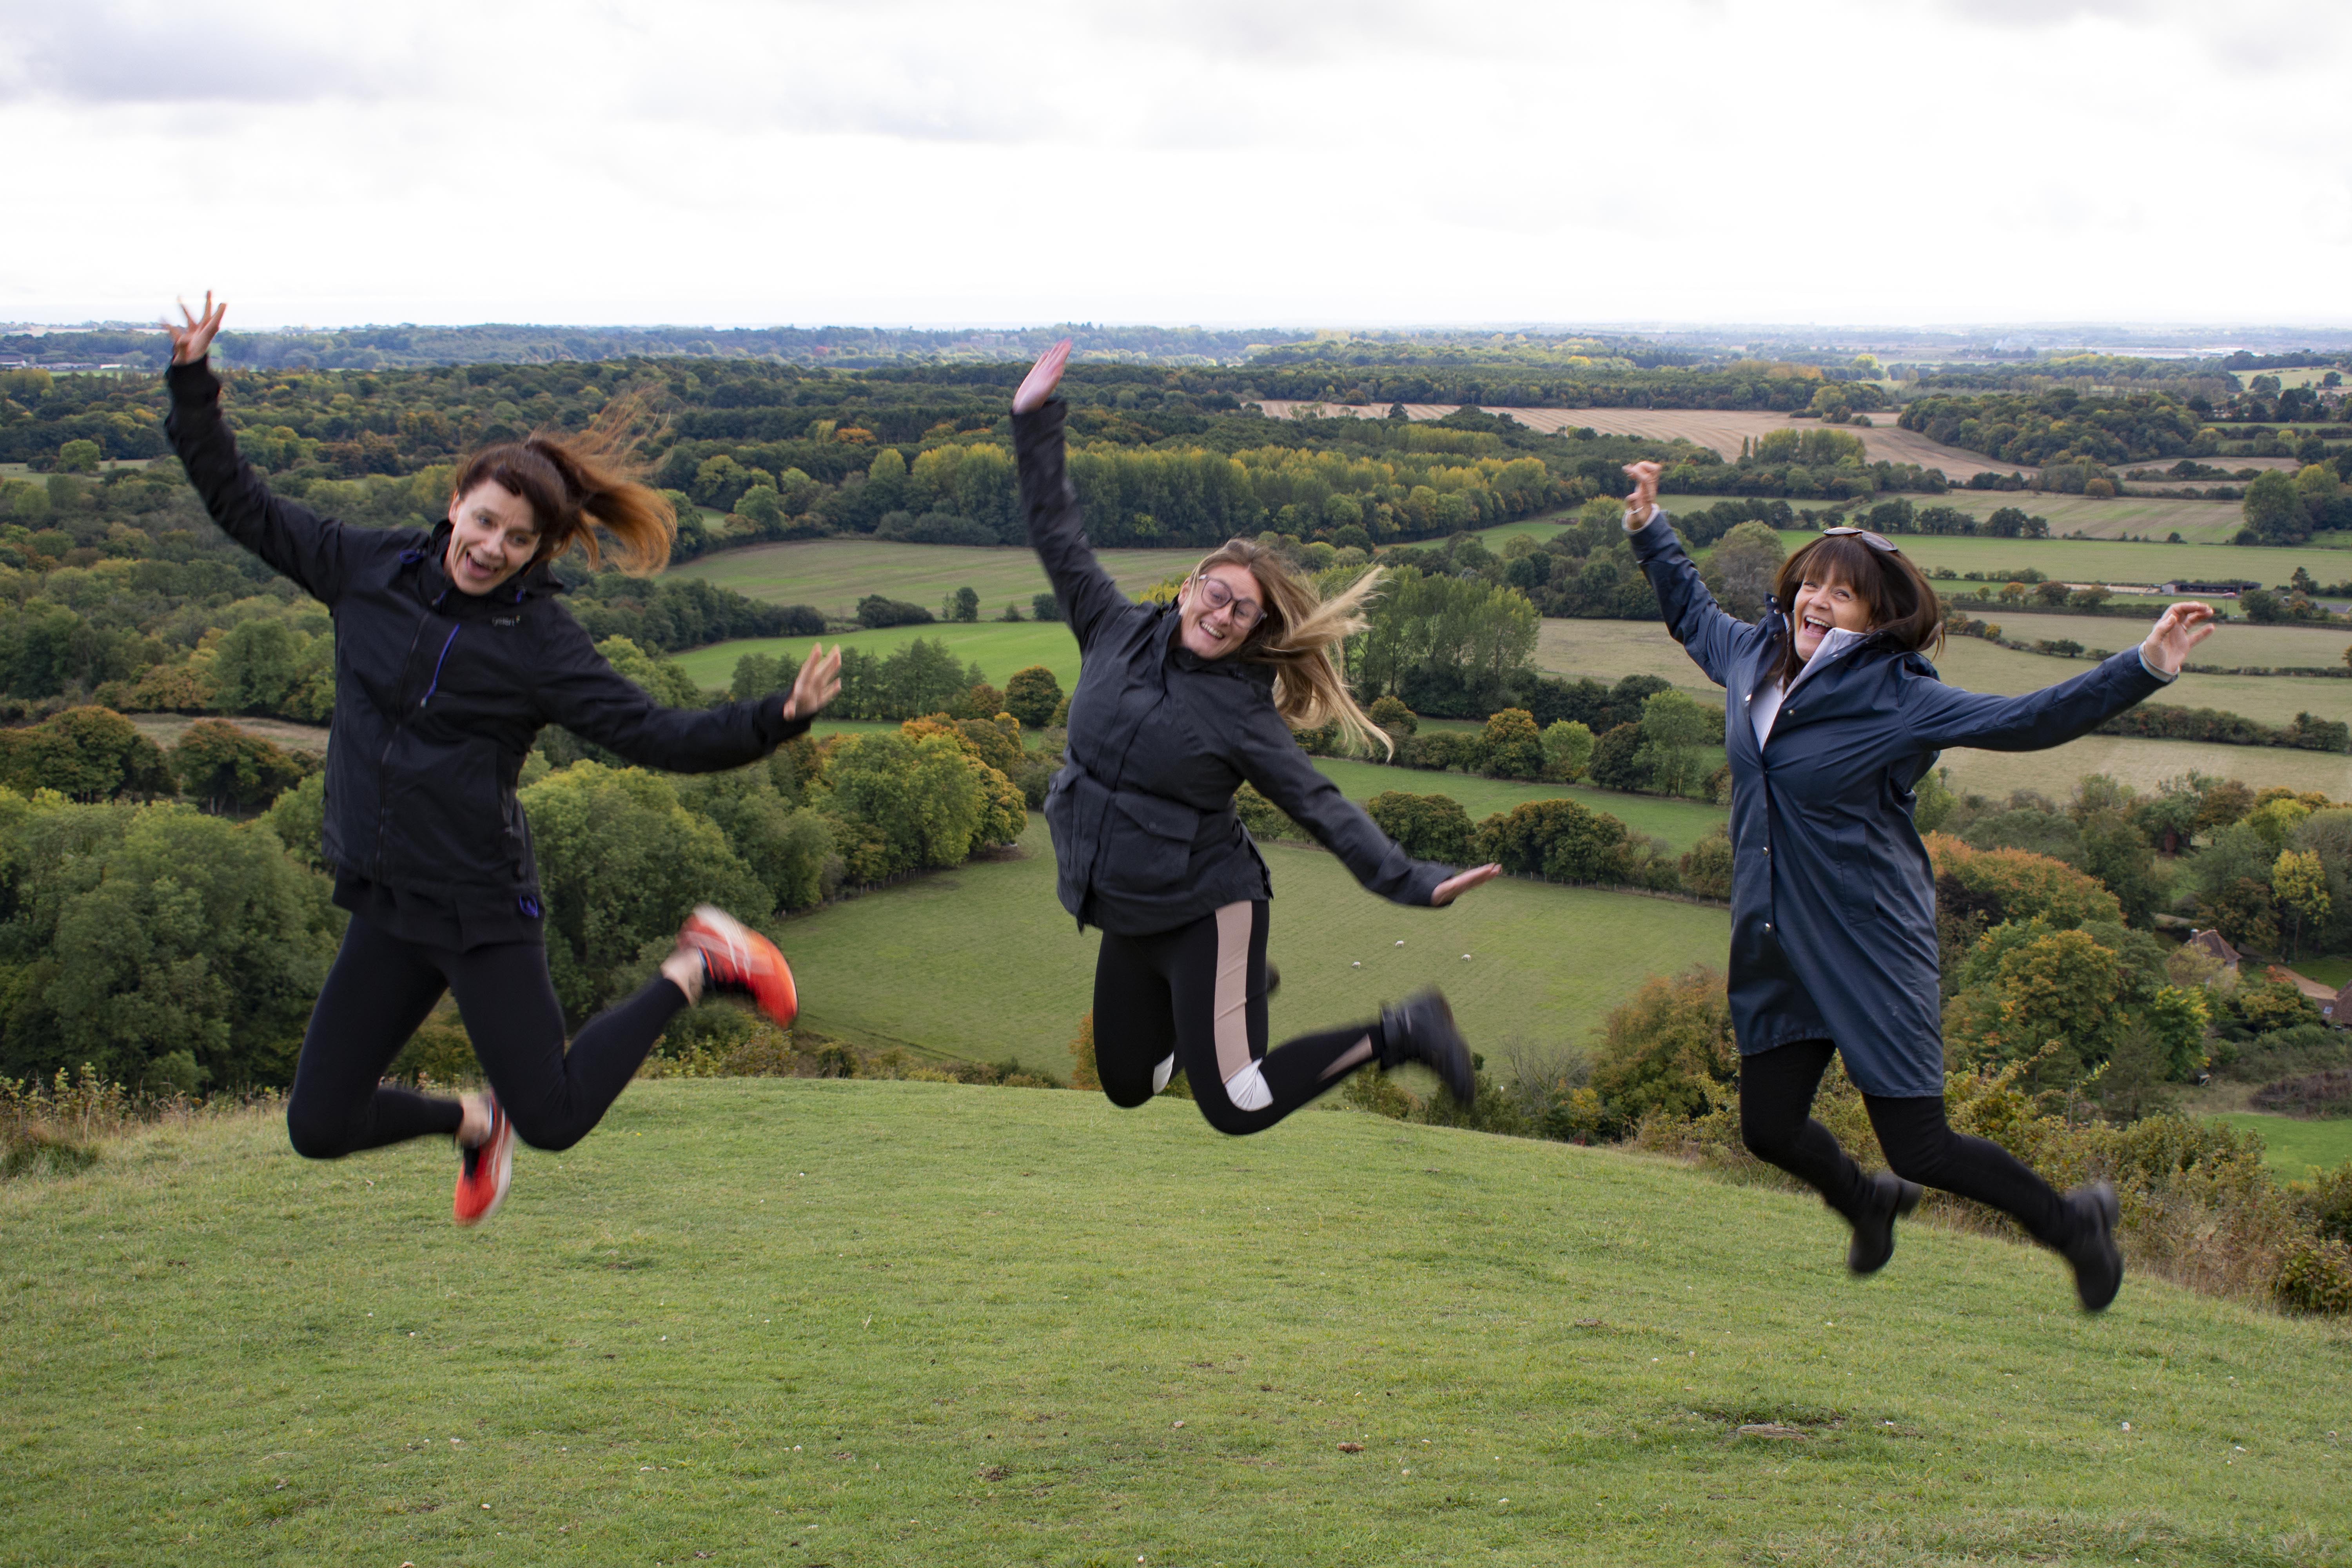 Three people jumping in the air, faces looking at the camera as they smile, withA person looking out across rolling fields and scenery in the background.